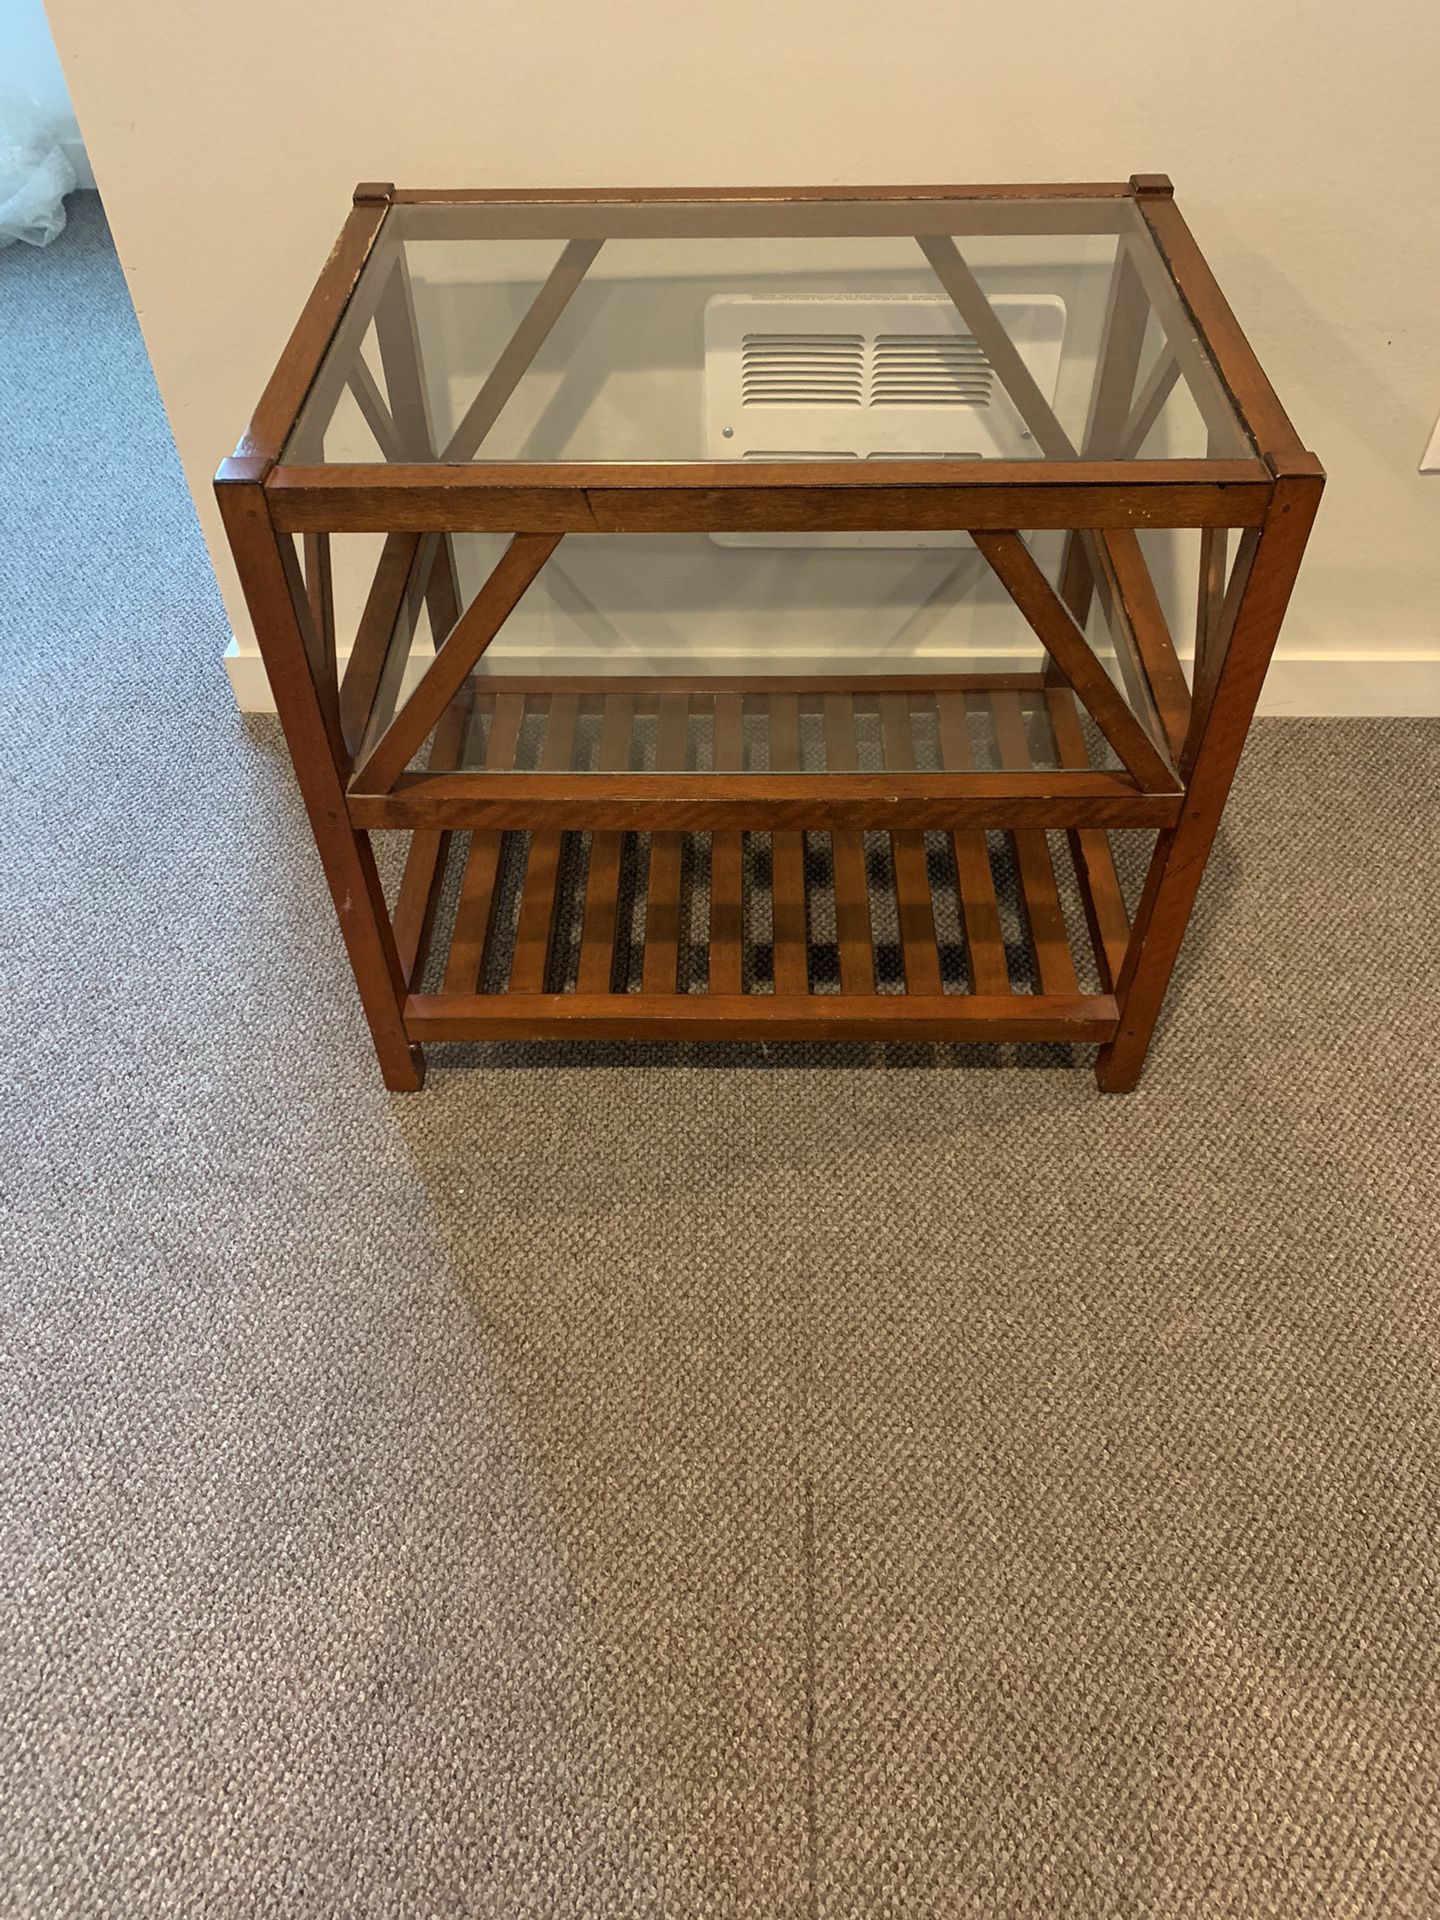 Three tier wooden side table with glass top. In good condition coming from a pet and smoke-free home. Asking only $30   Dimensions: length -19inch x w